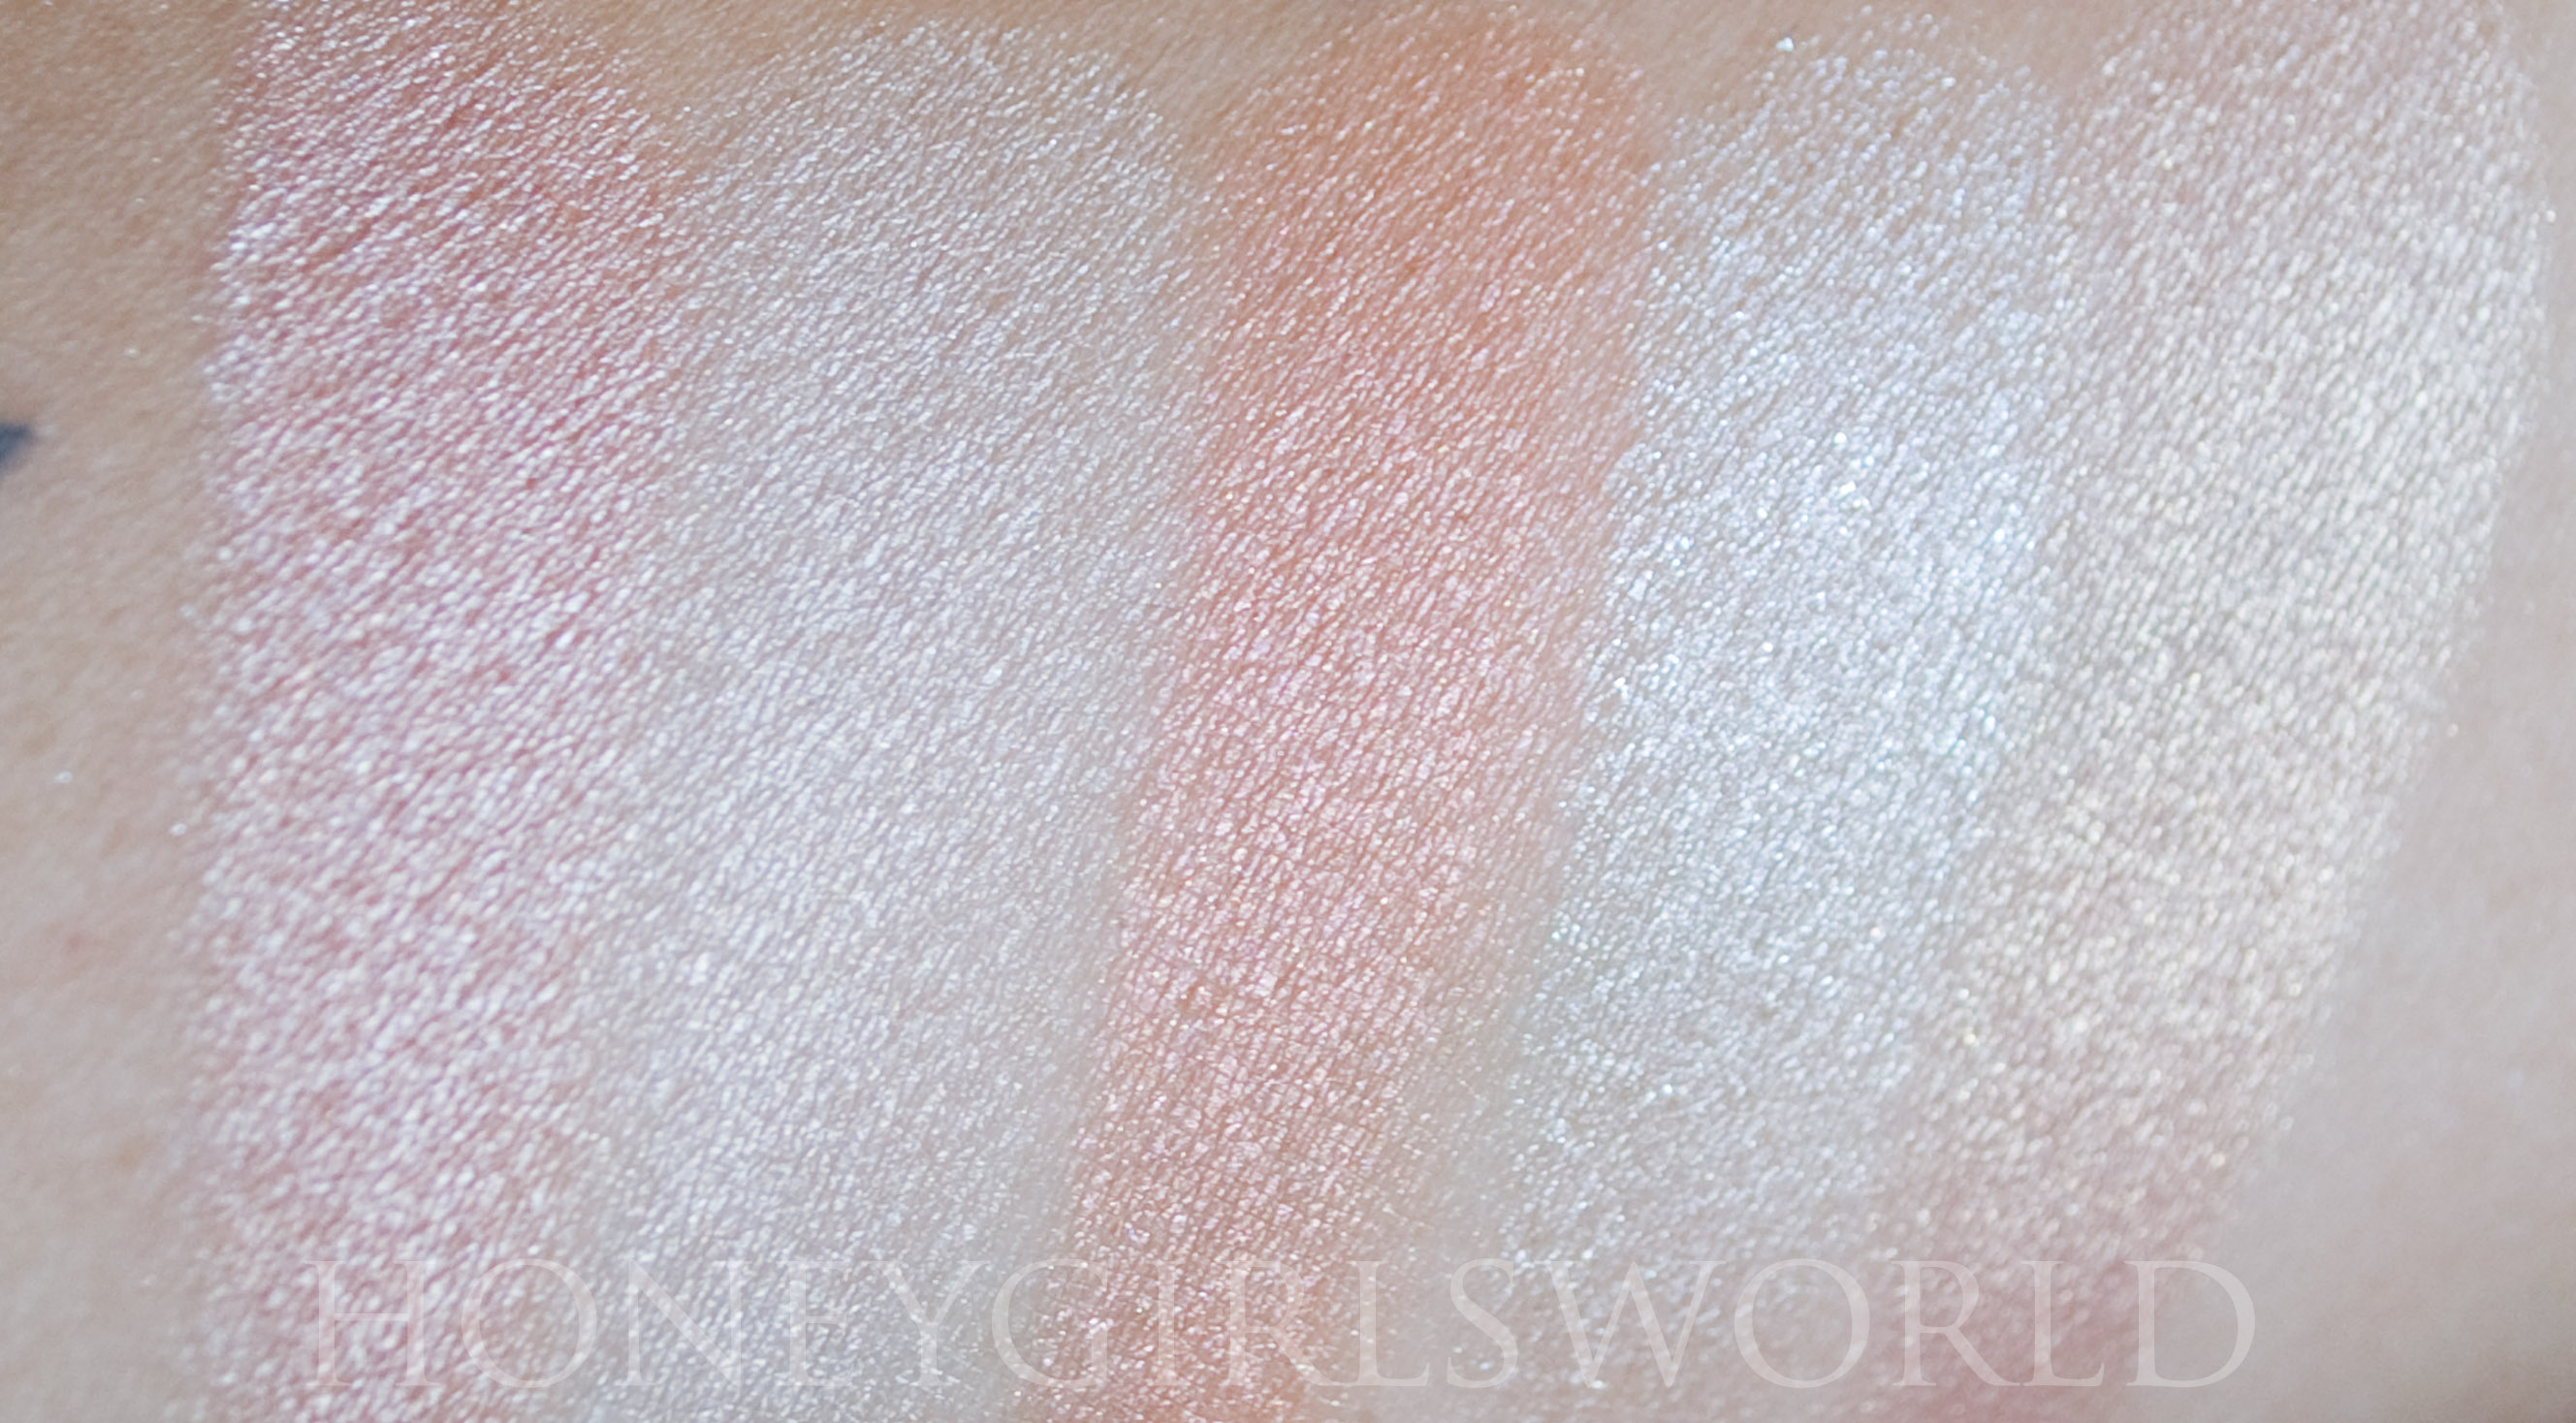 New Colour Pop Highlighters - Was it Love at First Sight For Me? http://honeygirlsworld.com